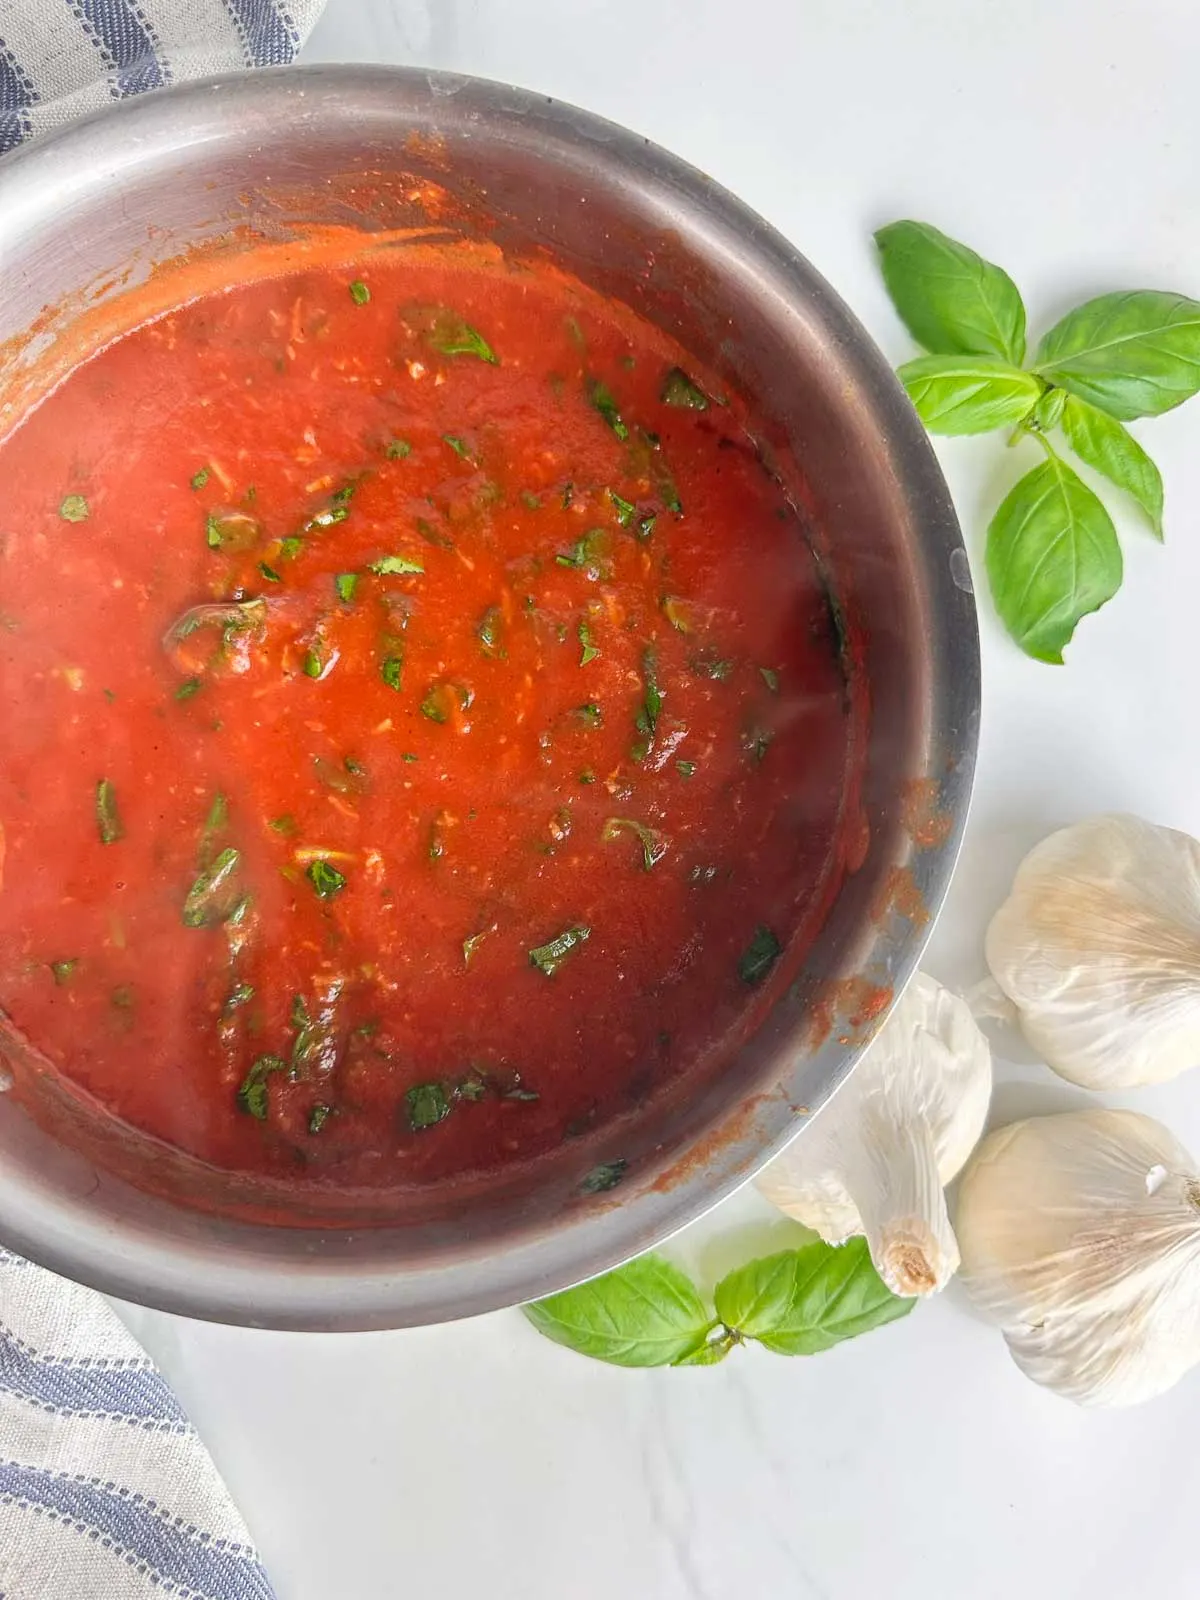 A pot of real Italian tomato sauce with basil ready to be spooned over spaghetti, meatballs, or anything else you can think of!